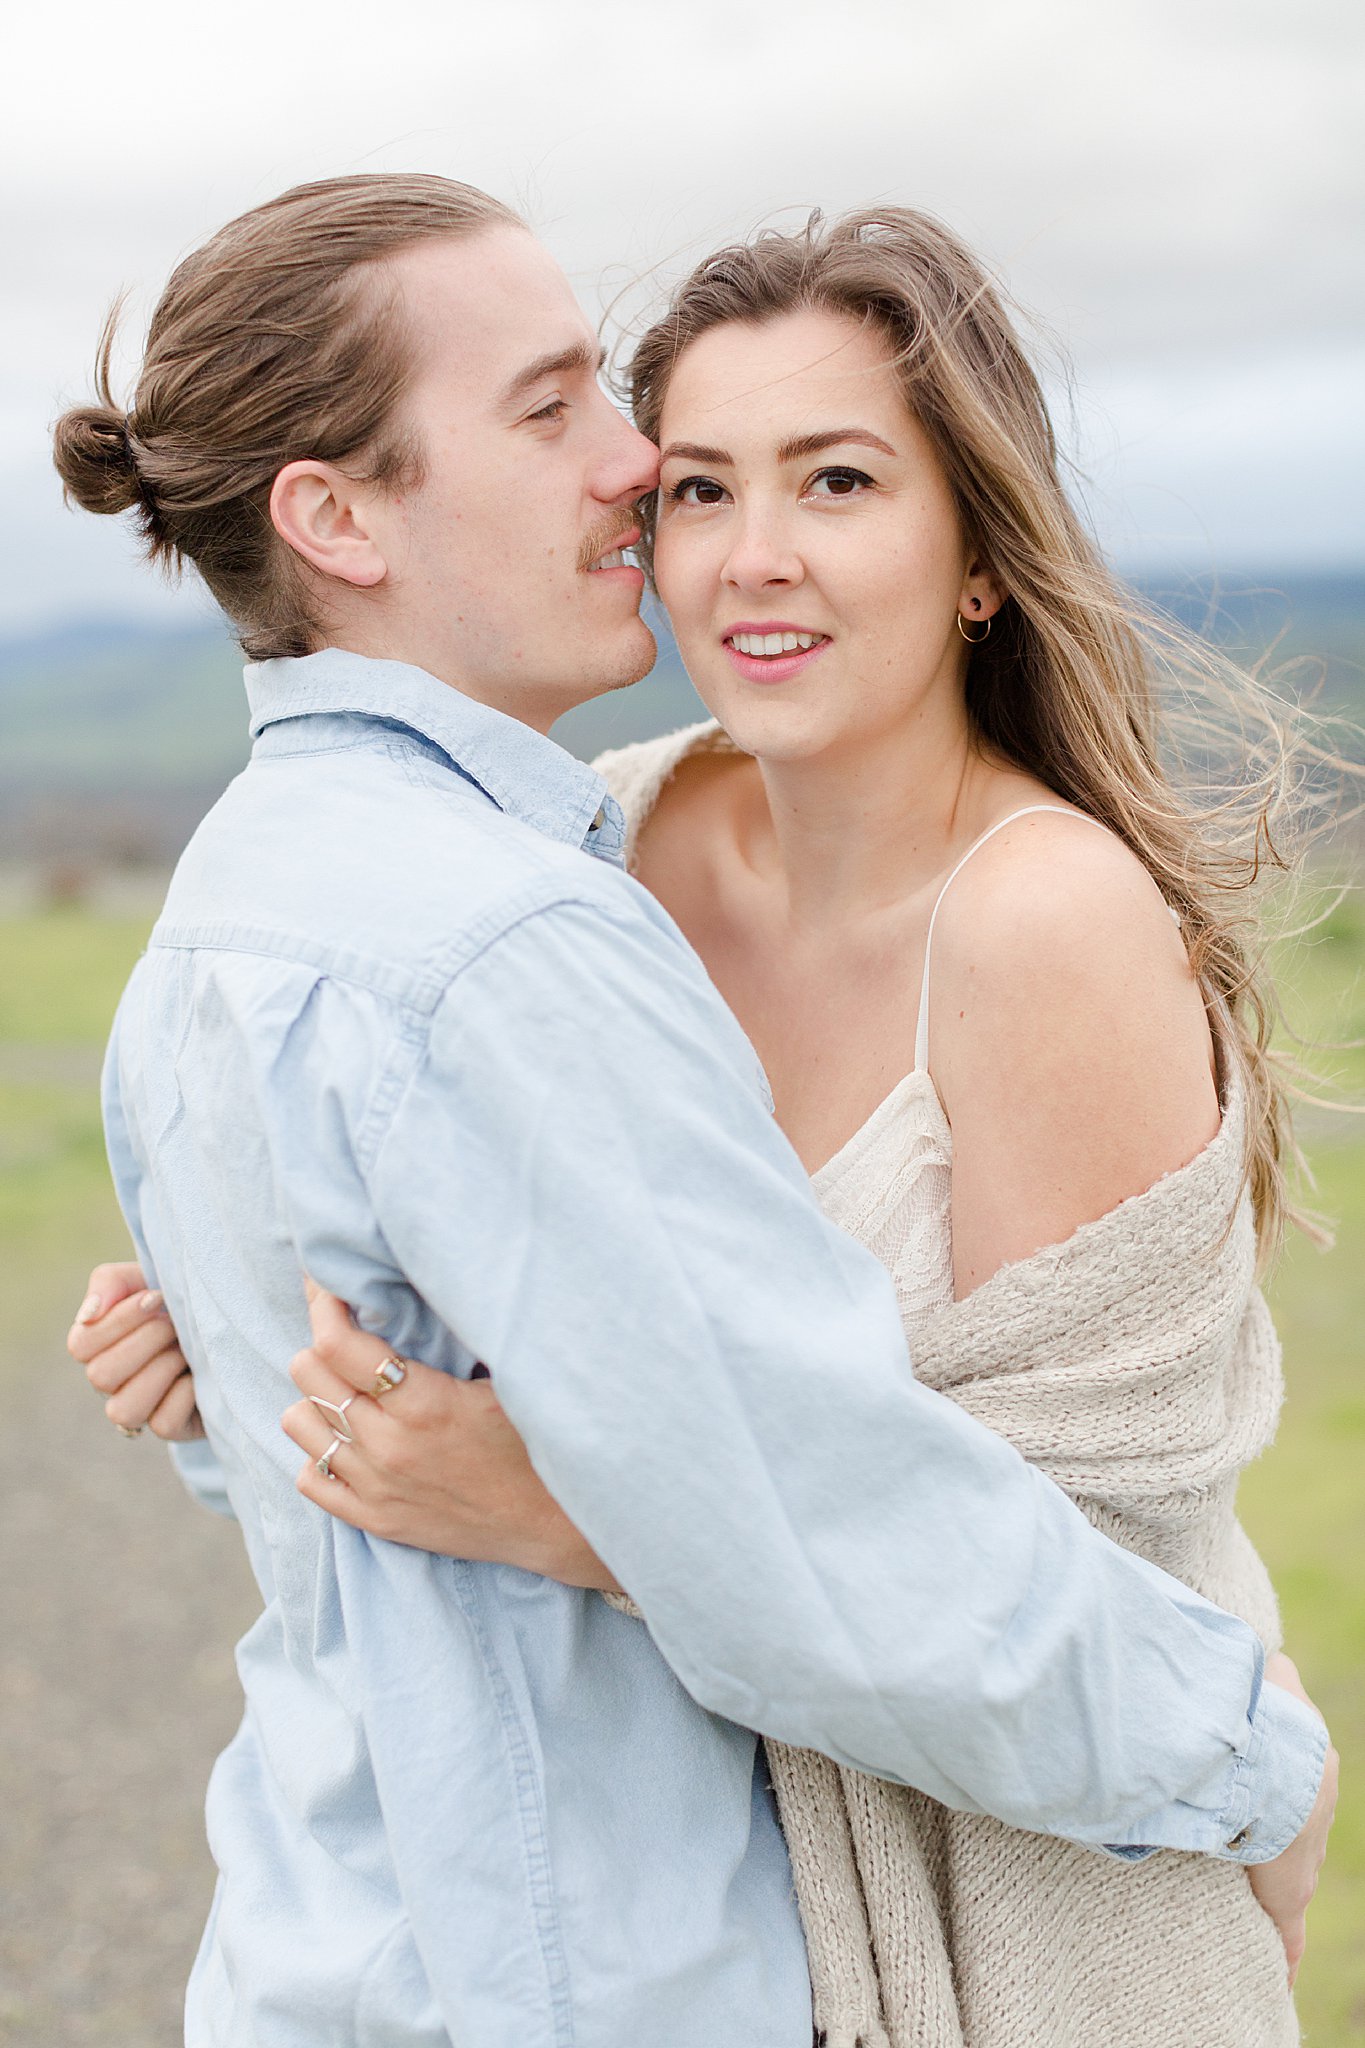 Sweetheart Pictures at Rowena Crest, Oregon